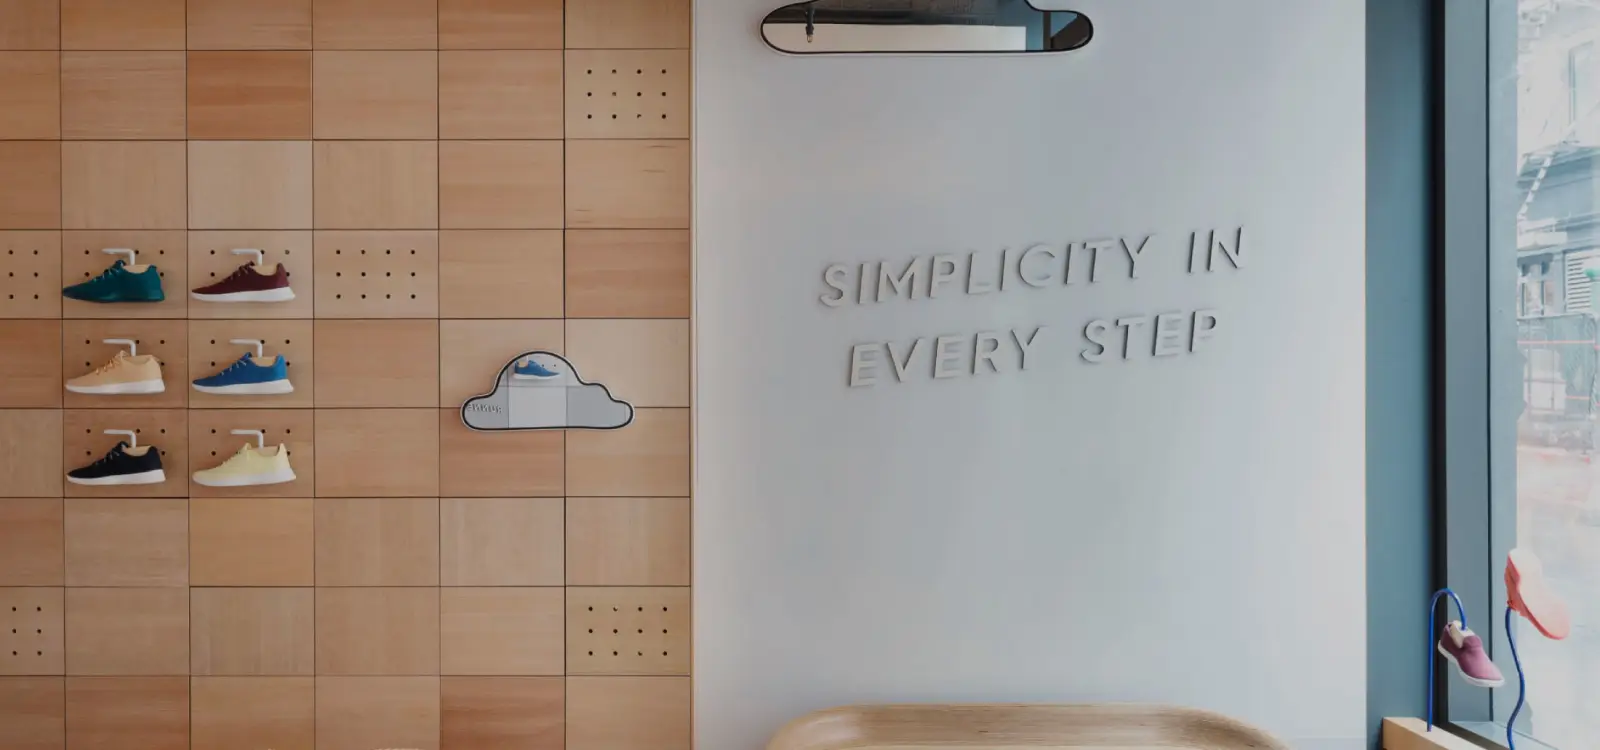 wall in allbirds shop that says 'simplicity in every step', shoe display